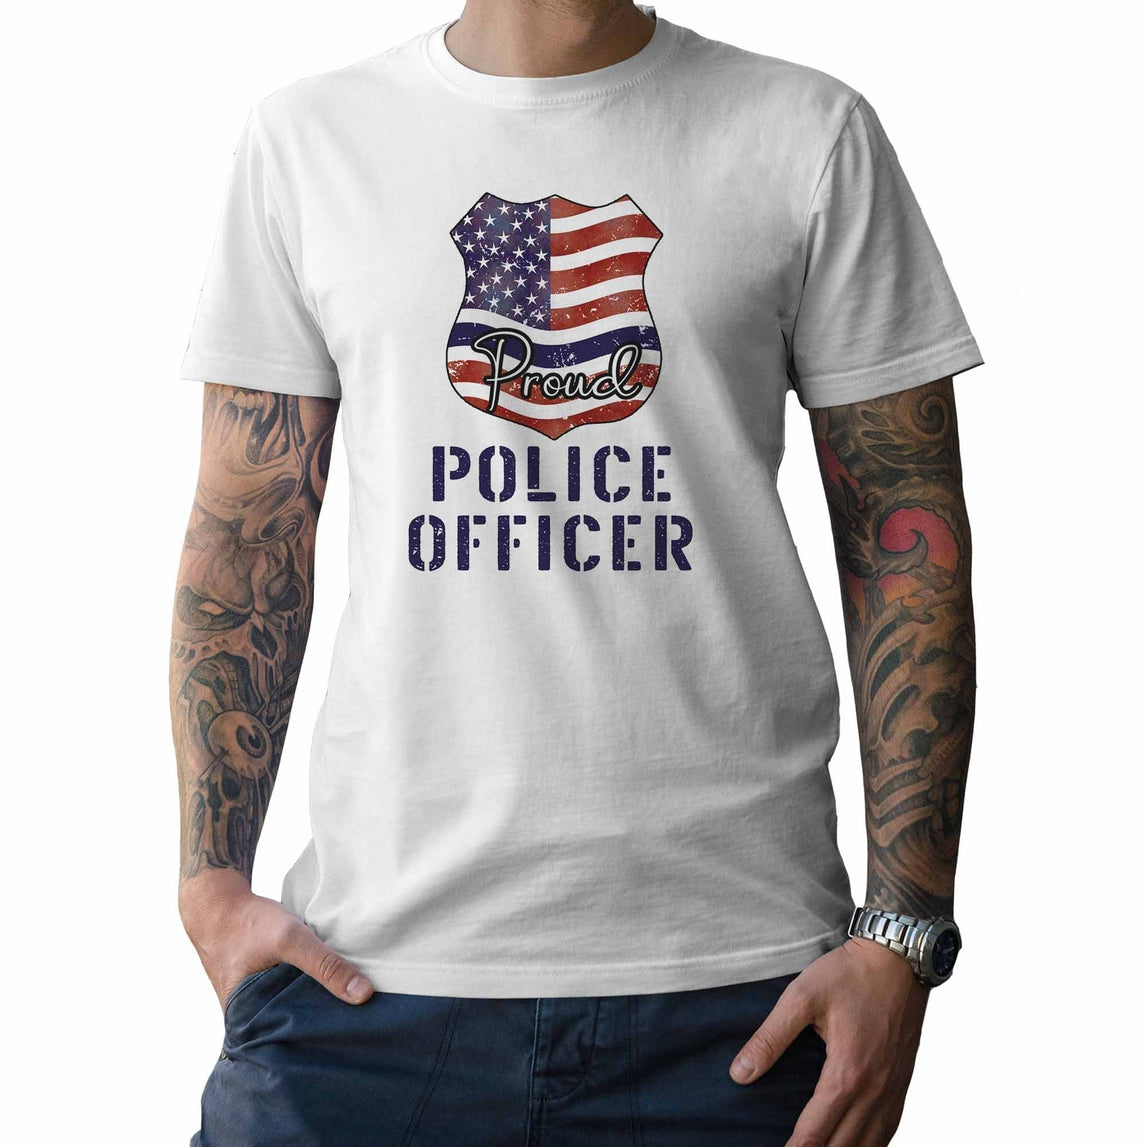 Proud Police Officer - My Custom Tee Party